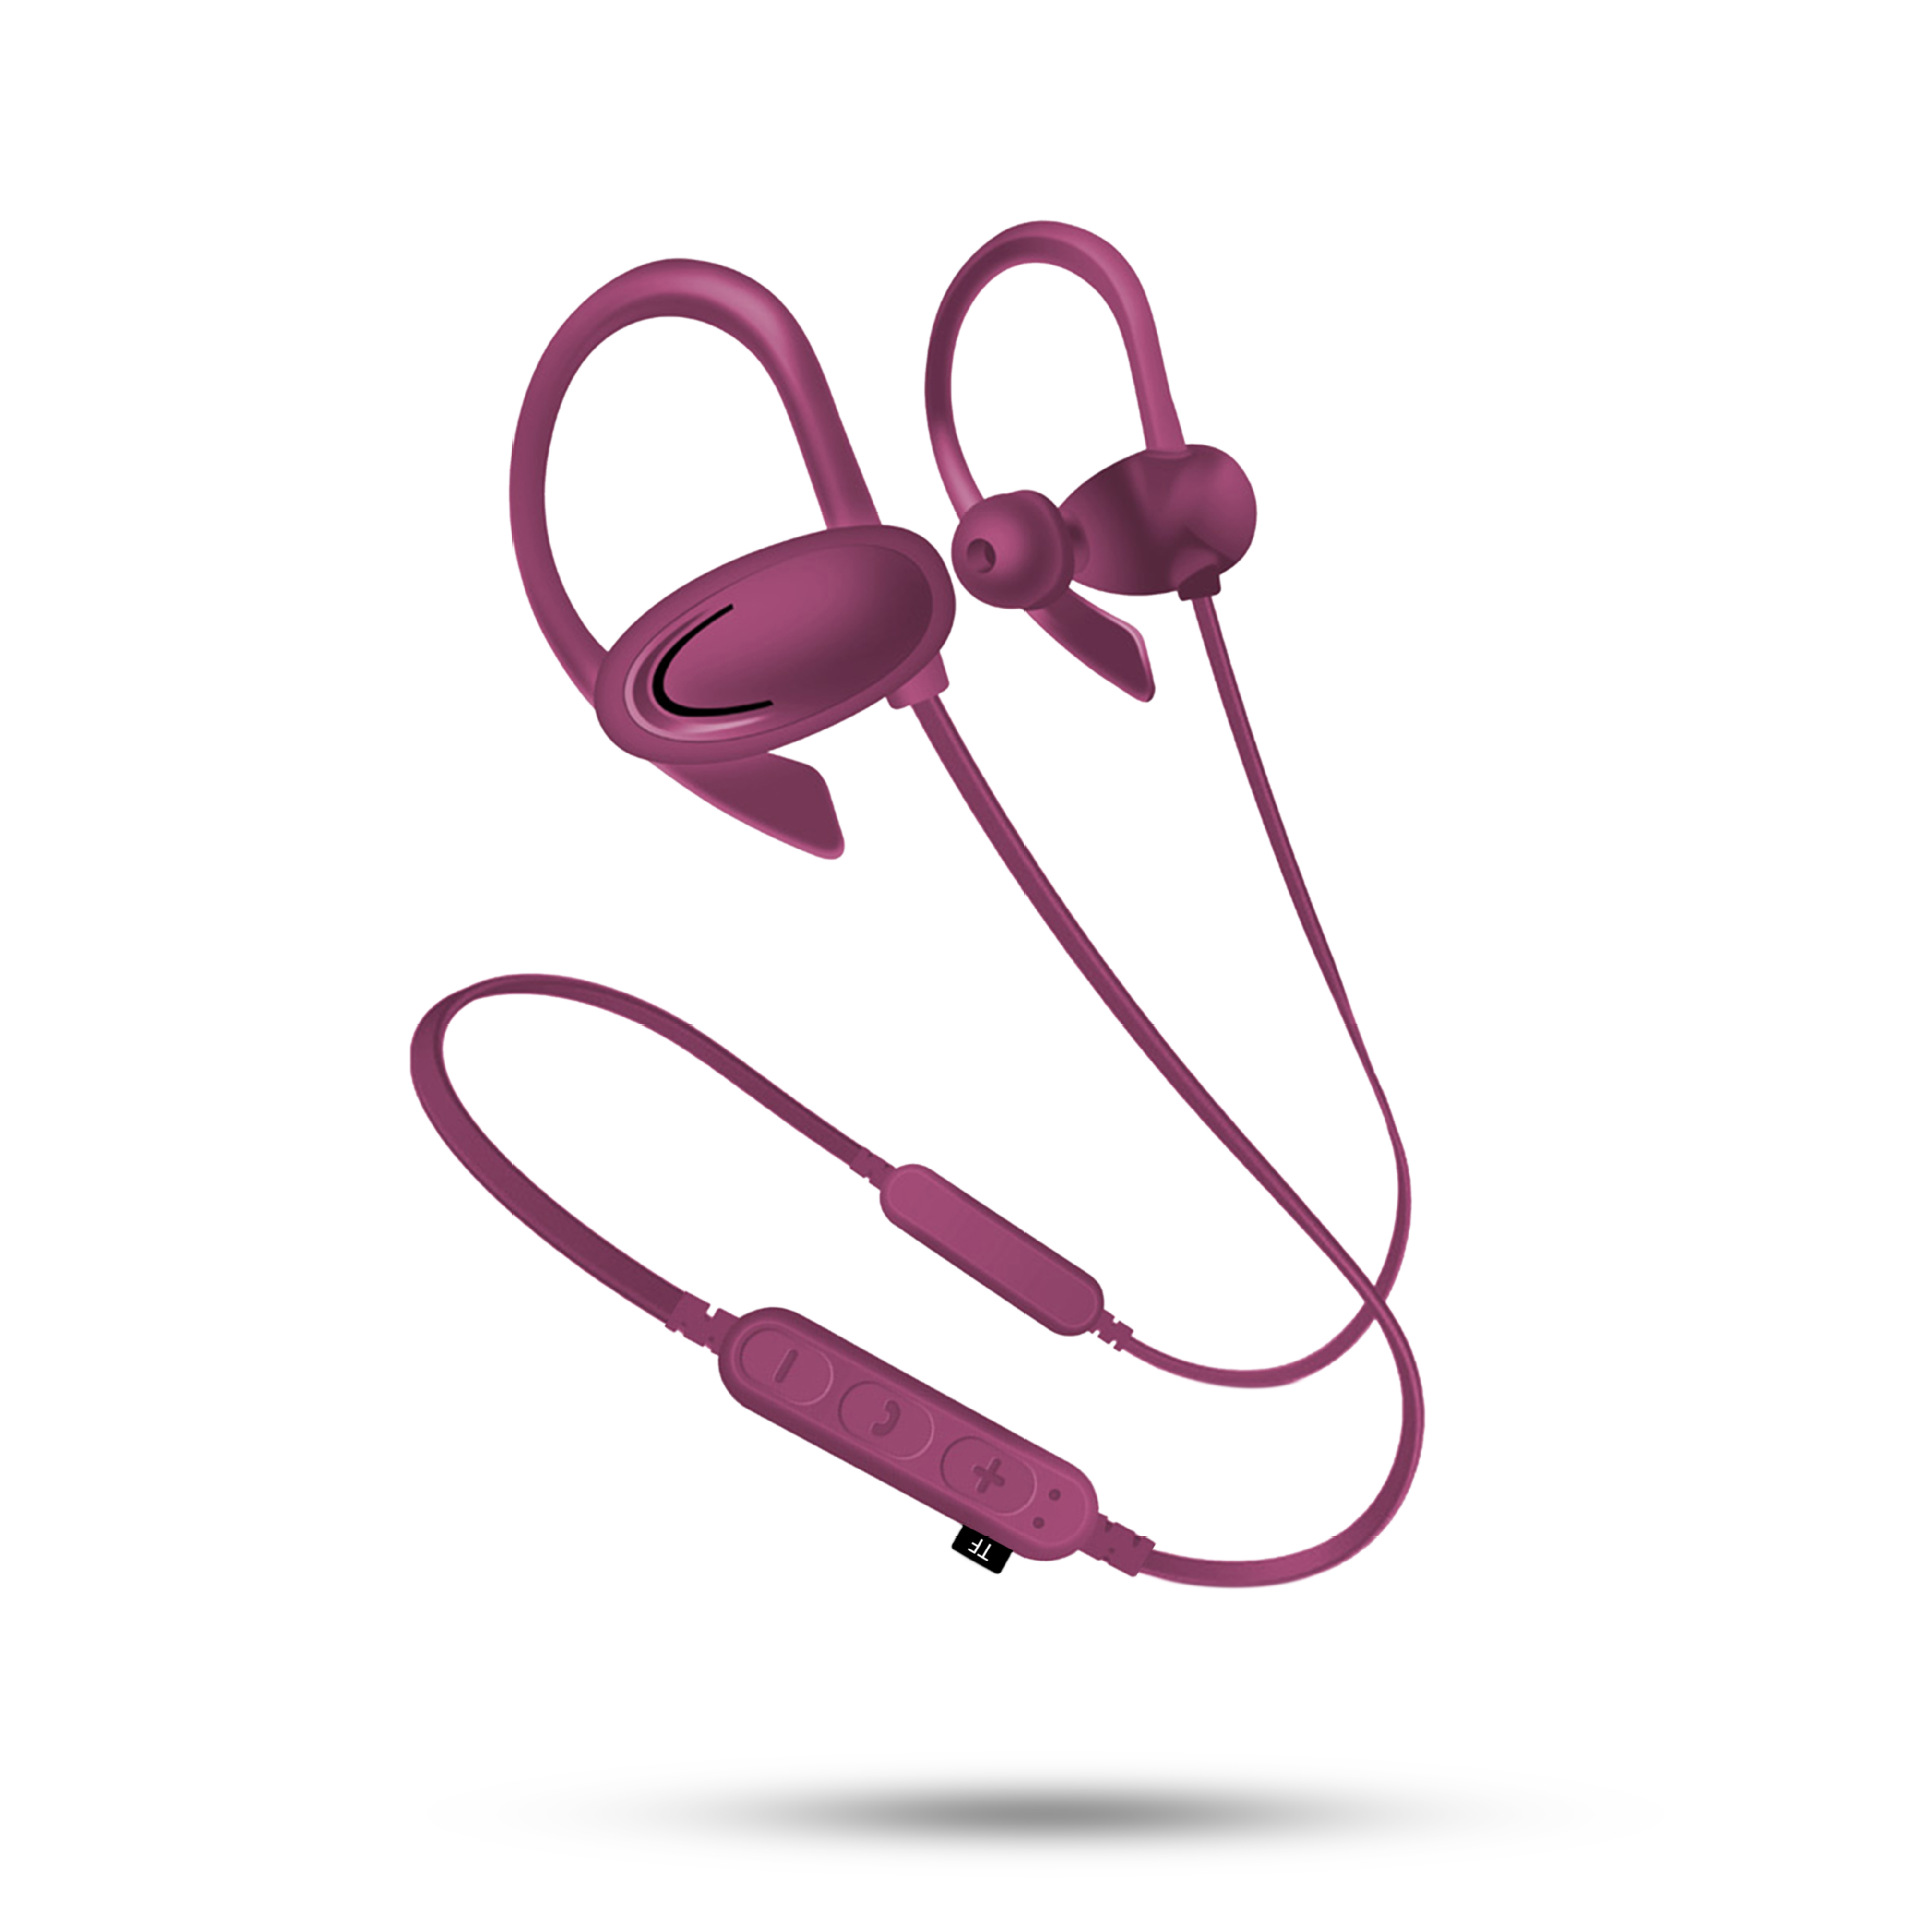 Hook Style Bluetooth Earphone Headset with MicroSD MUSIC Slot MSF1 (Hot Pink)